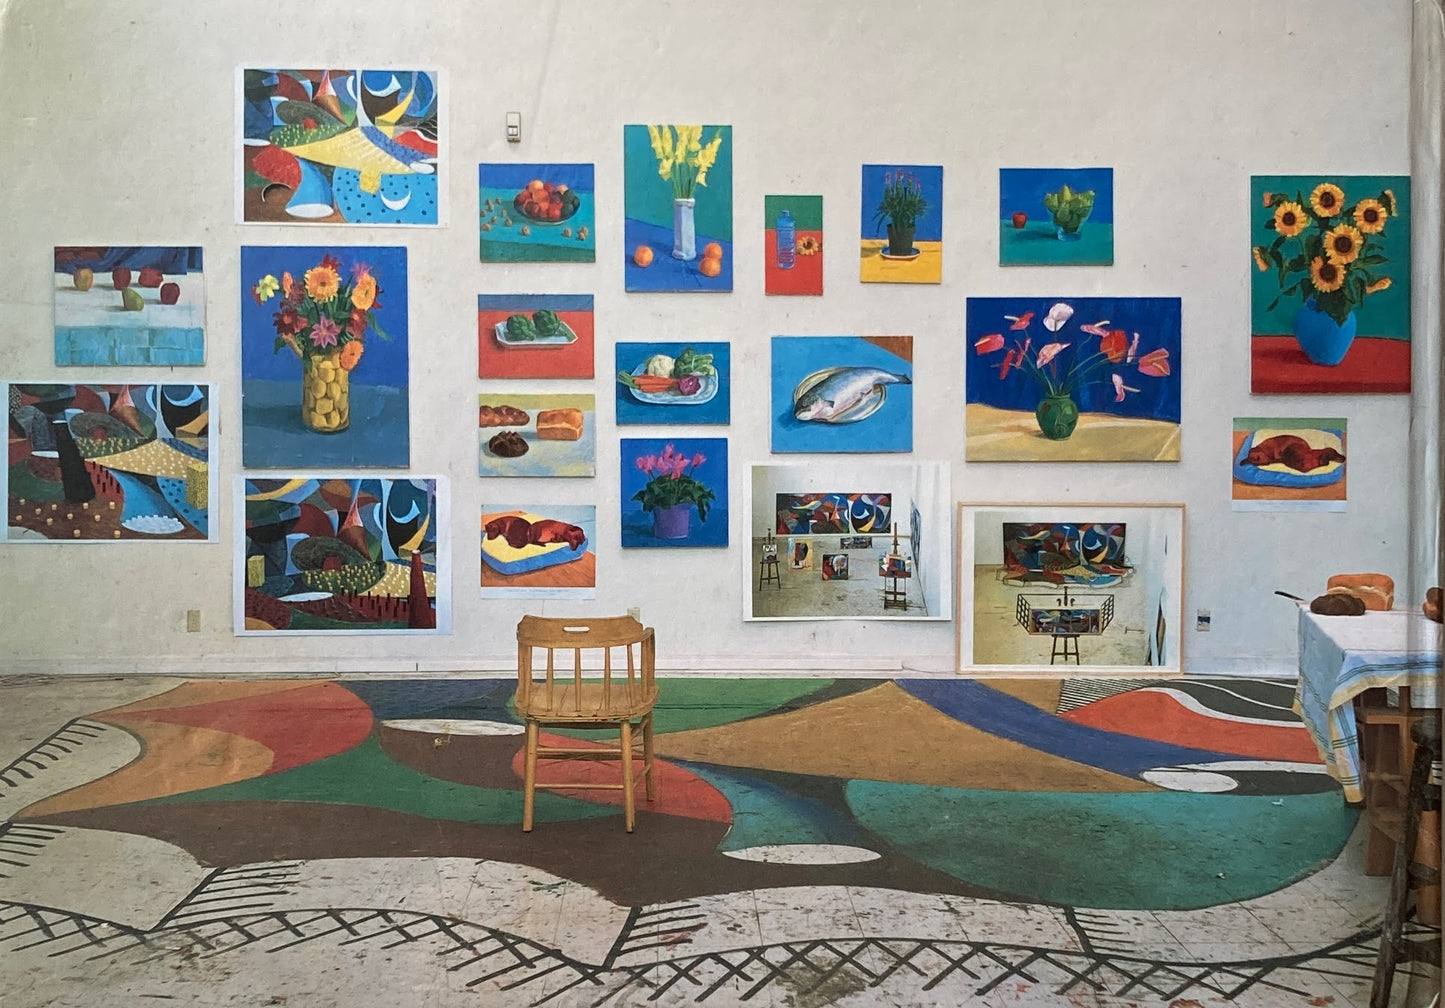 David Hockney　Paintings and Photographs of Paintings　デイヴィッド・ホックニー